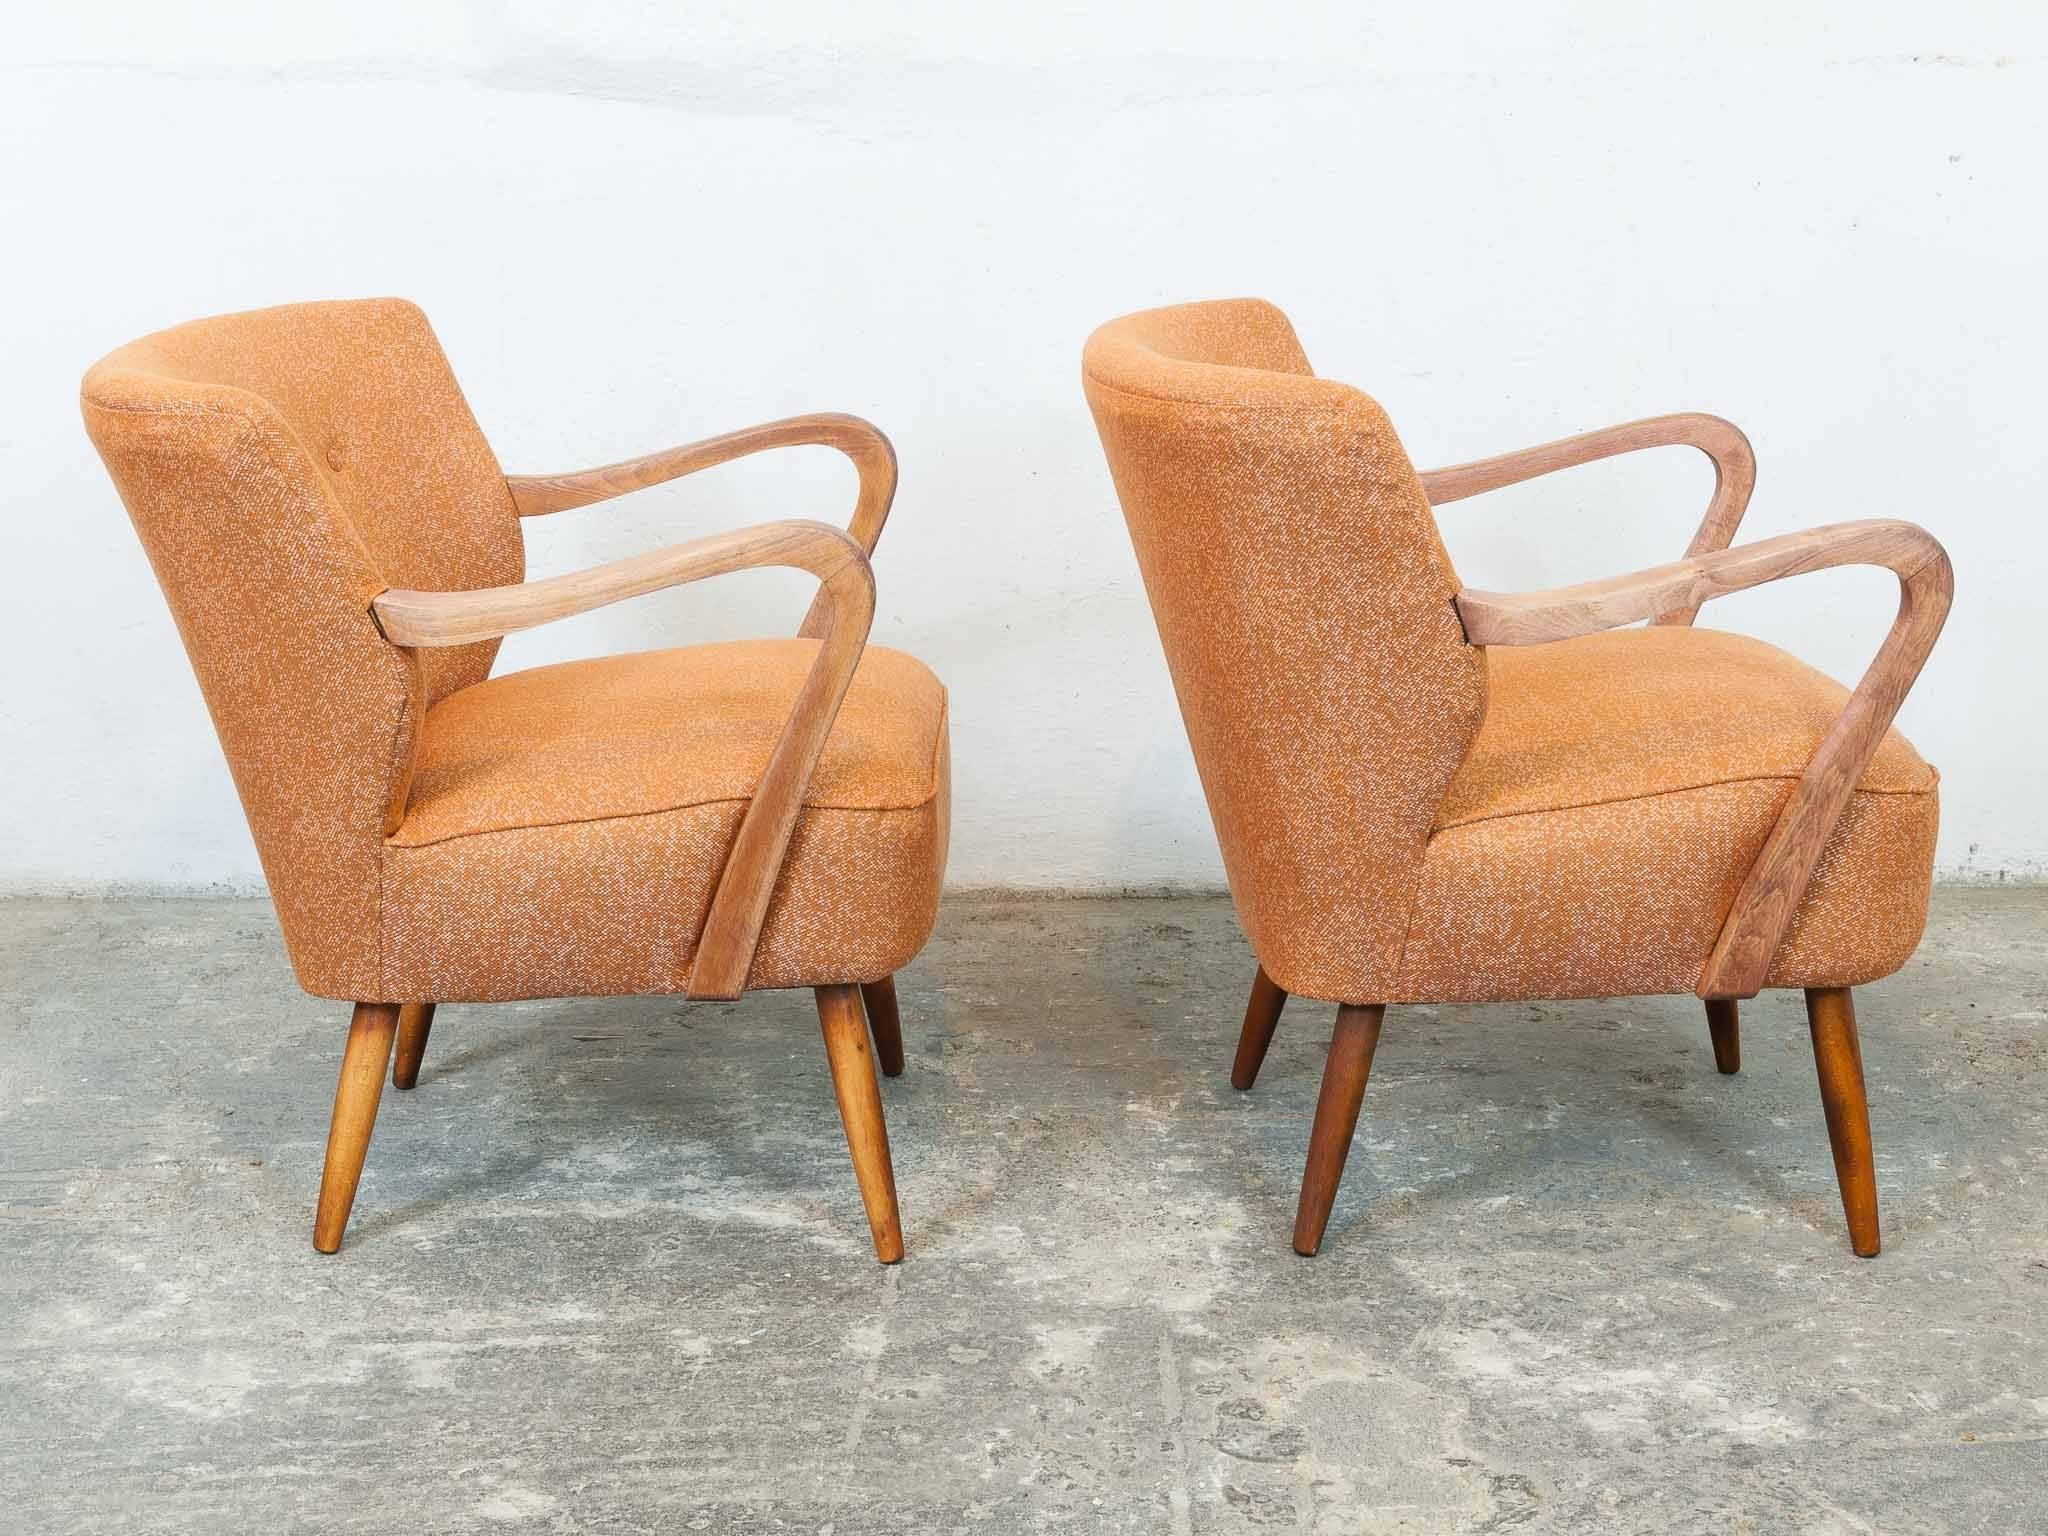 Pair of 1940s Vintage Midcentury Cocktail Chairs in Astro Orange Fabric 3